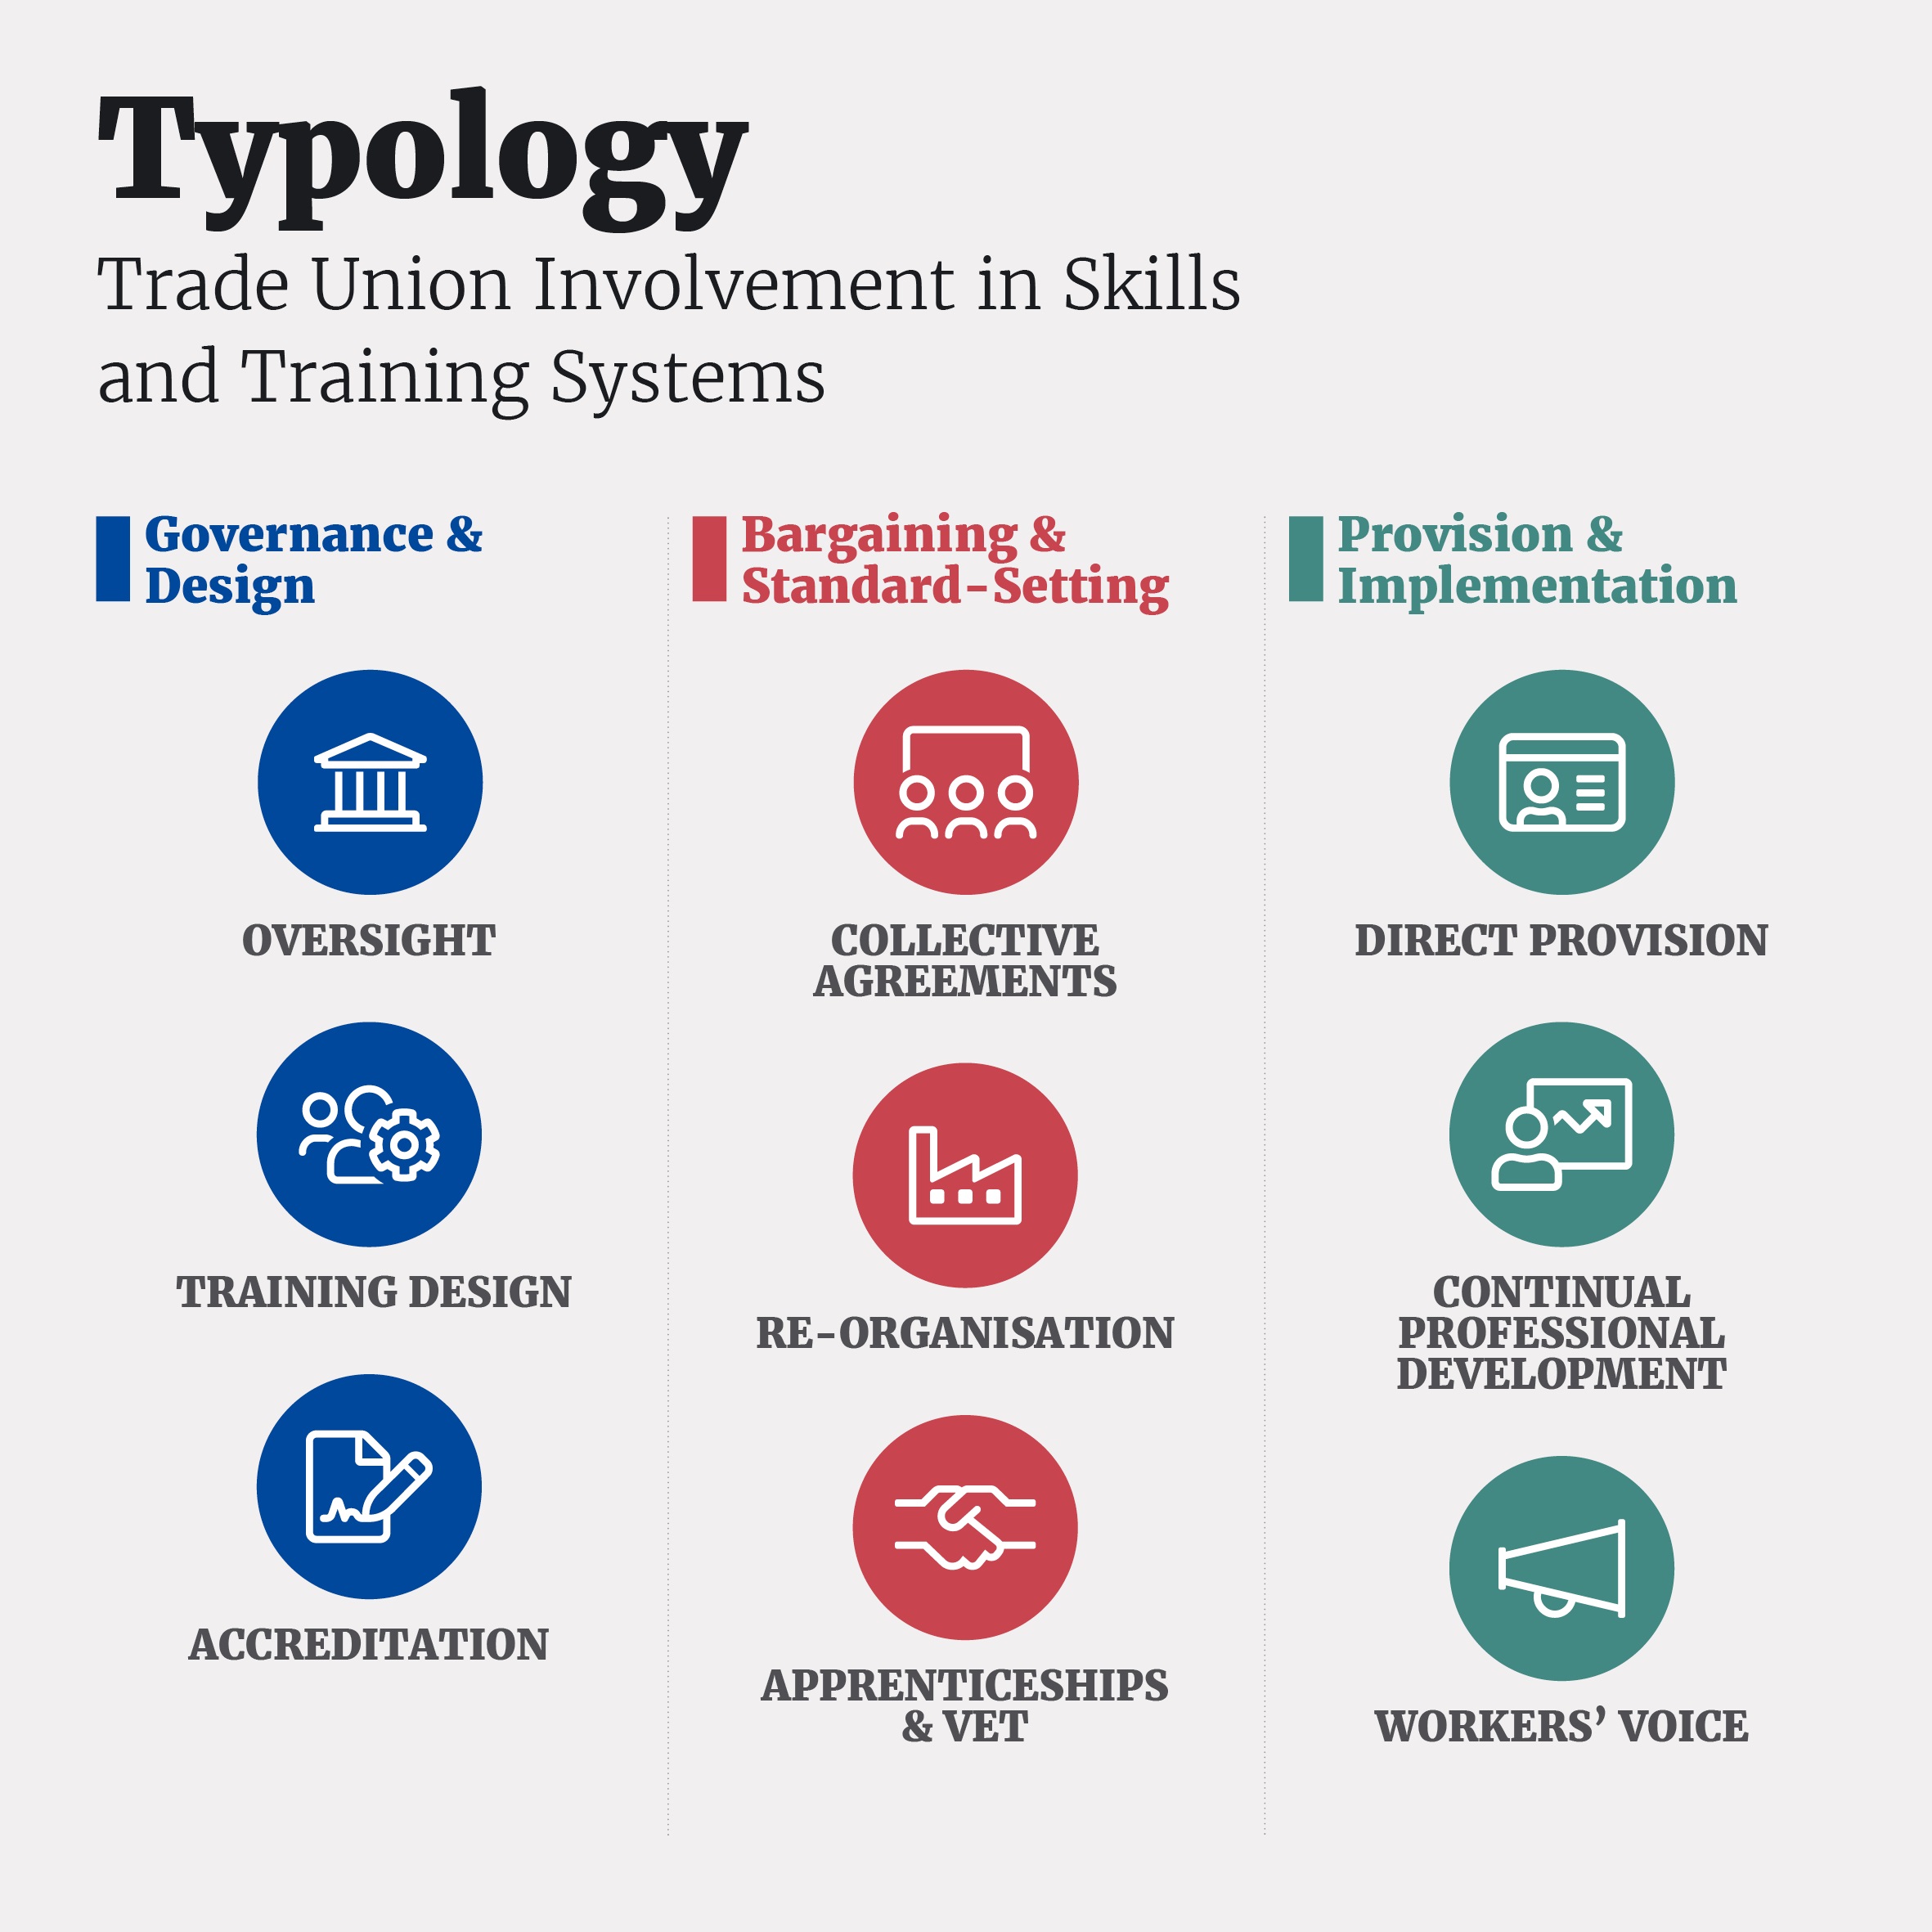 Typology_Skills and unions_short